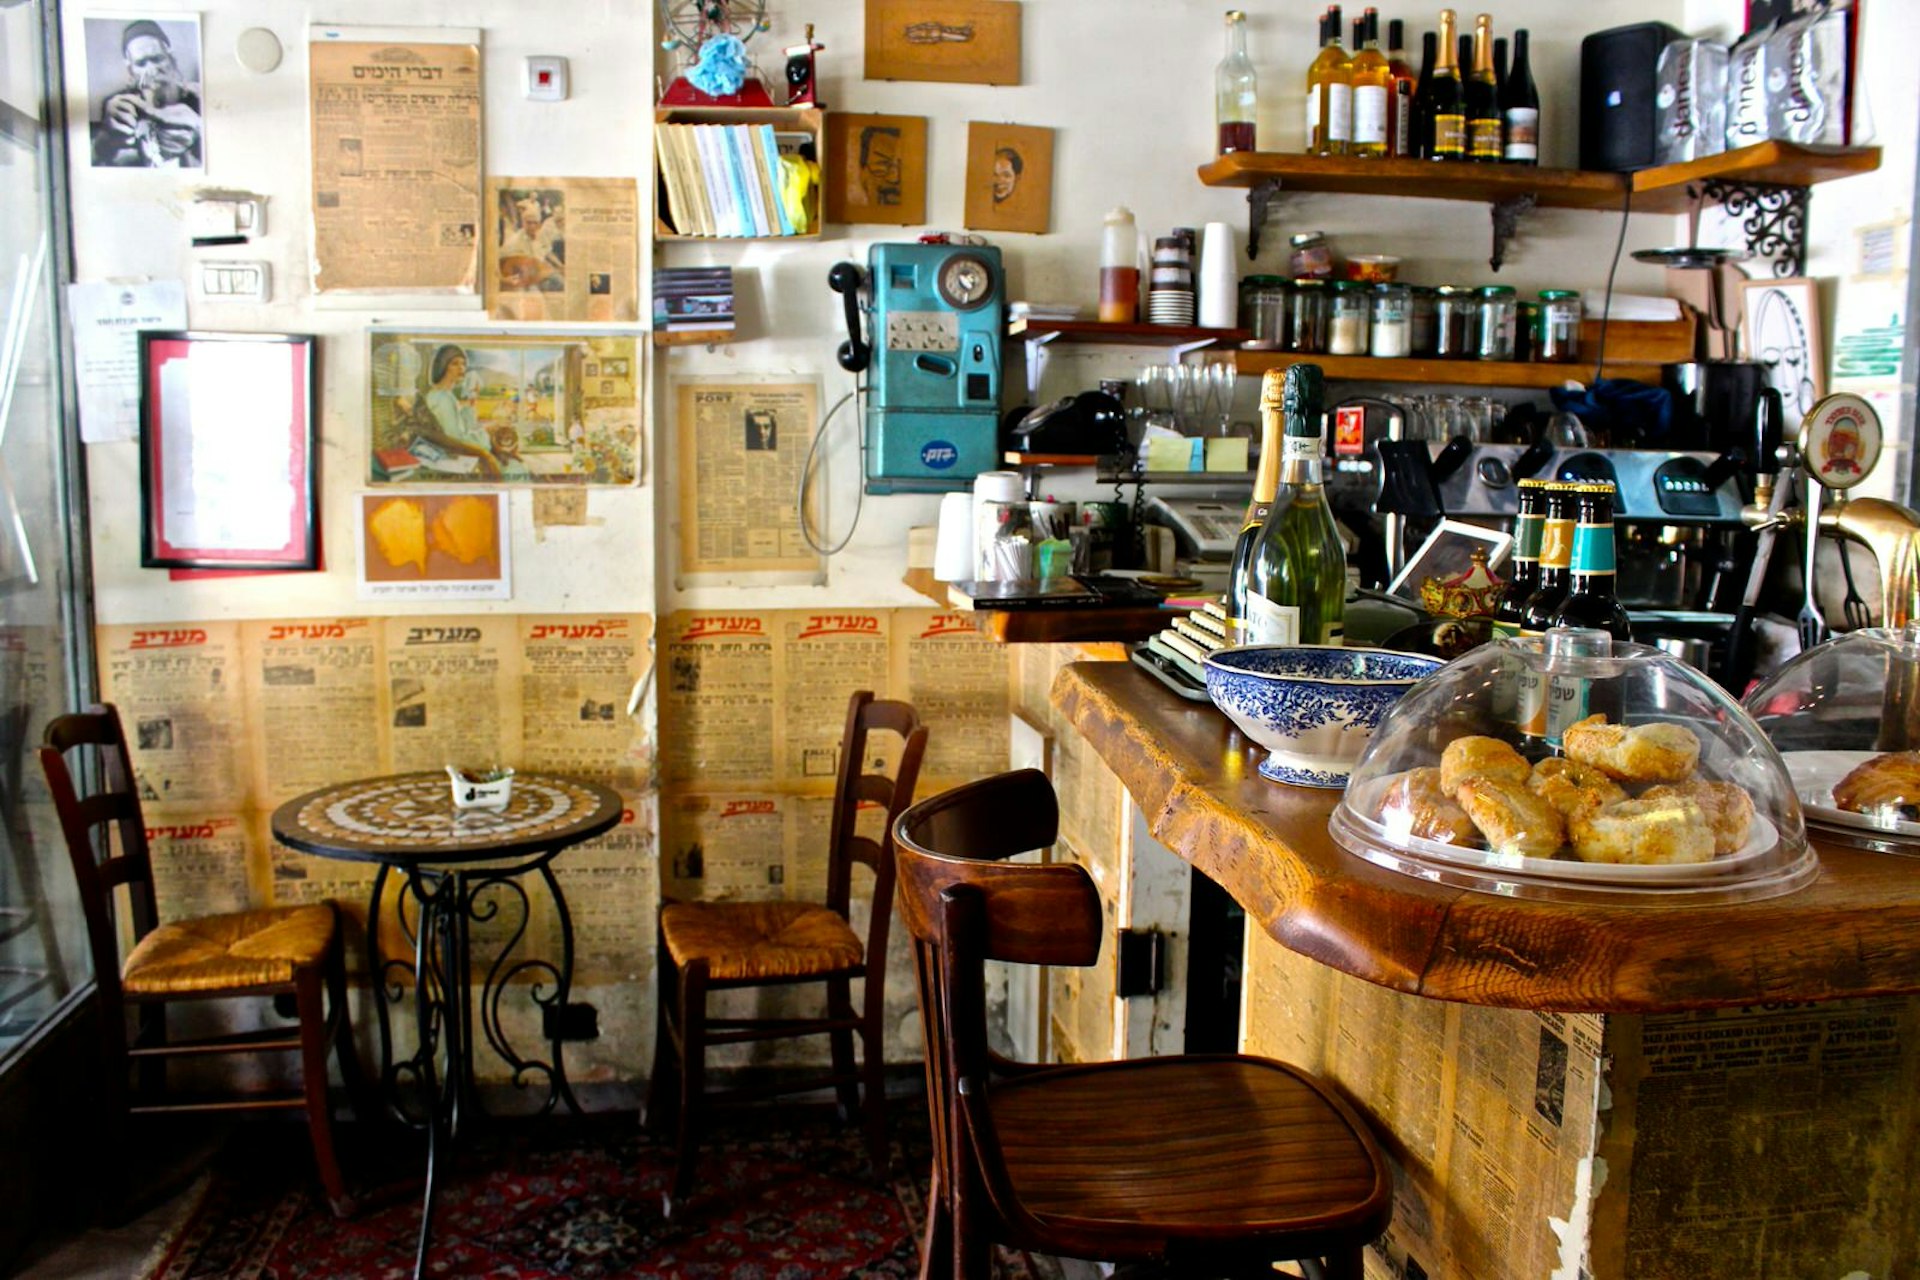 Old-school decor at Carousela in Jerusalem. Image by Miriam Berger / Lonely Planet